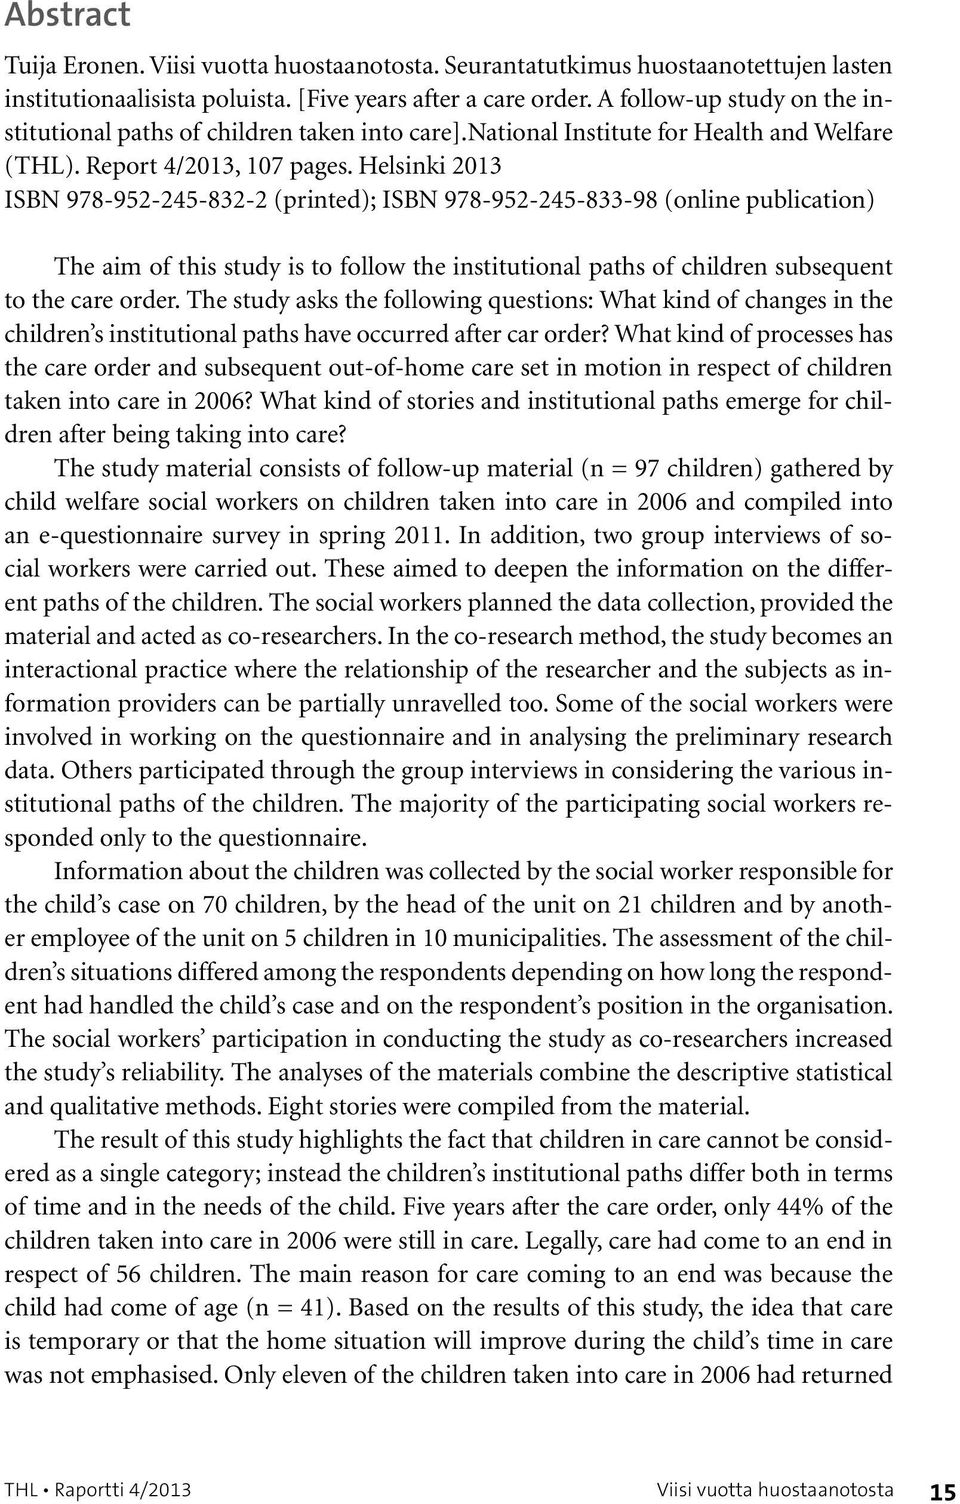 Helsinki 2013 ISBN 978-952-245-832-2 (printed); ISBN 978-952-245-833-98 (online publication) The aim of this study is to follow the institutional paths of children subsequent to the care order.